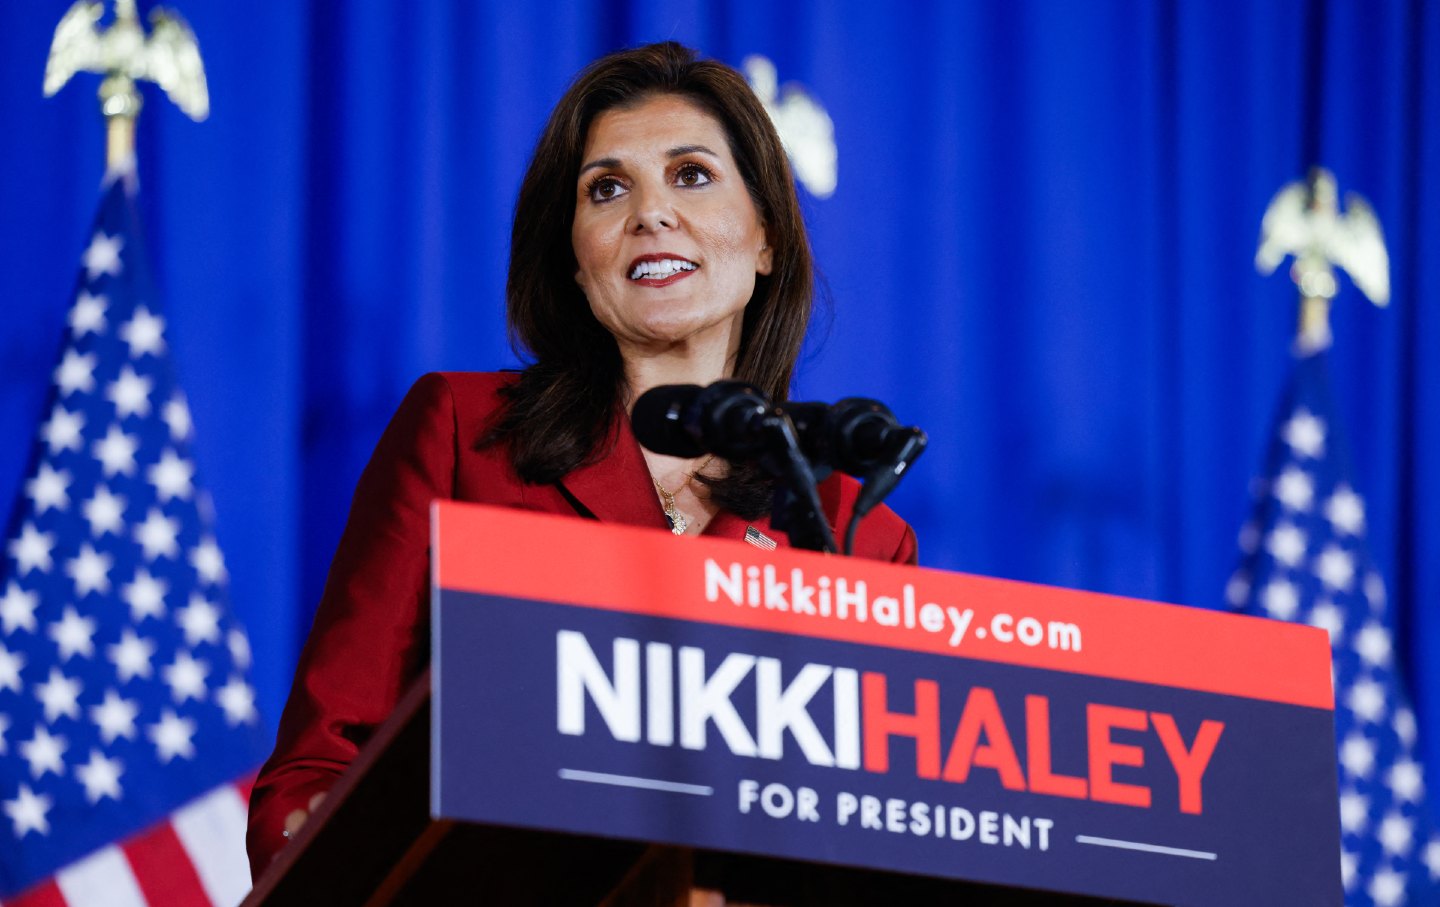 Former South Carolina governor and presidential candidate Nikki Haley speaks at her electio-night watch party in Charleston on February 24, 2024.